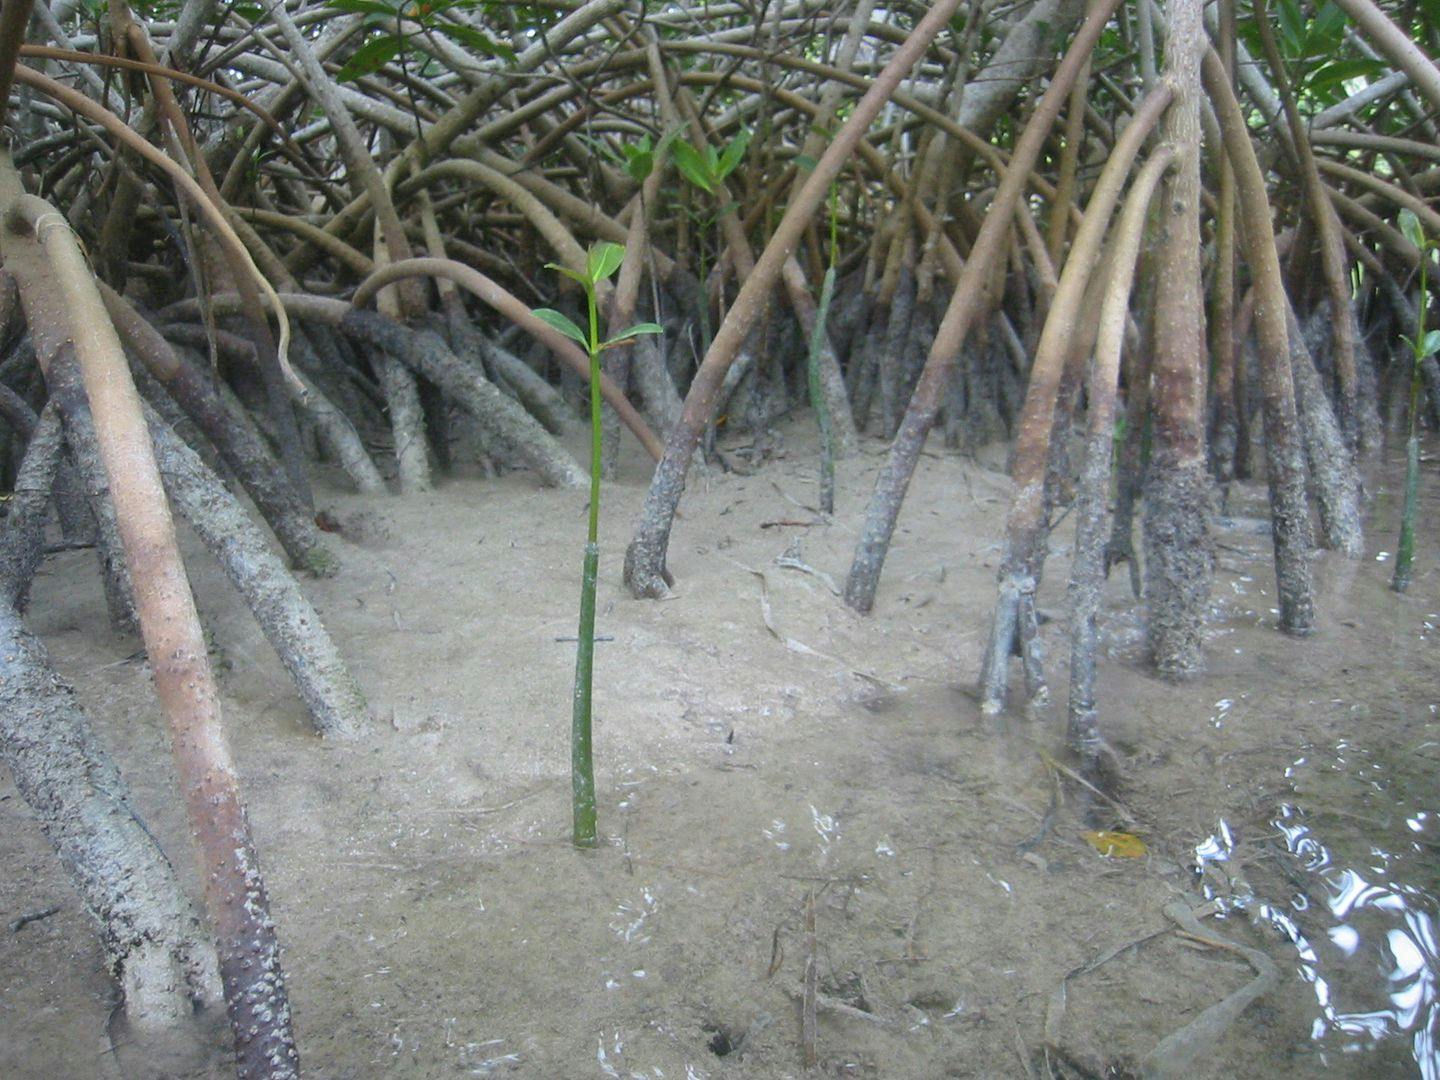 Mangroves have support trunks that makes them stable in the mud. Photo: Ronald Toppe